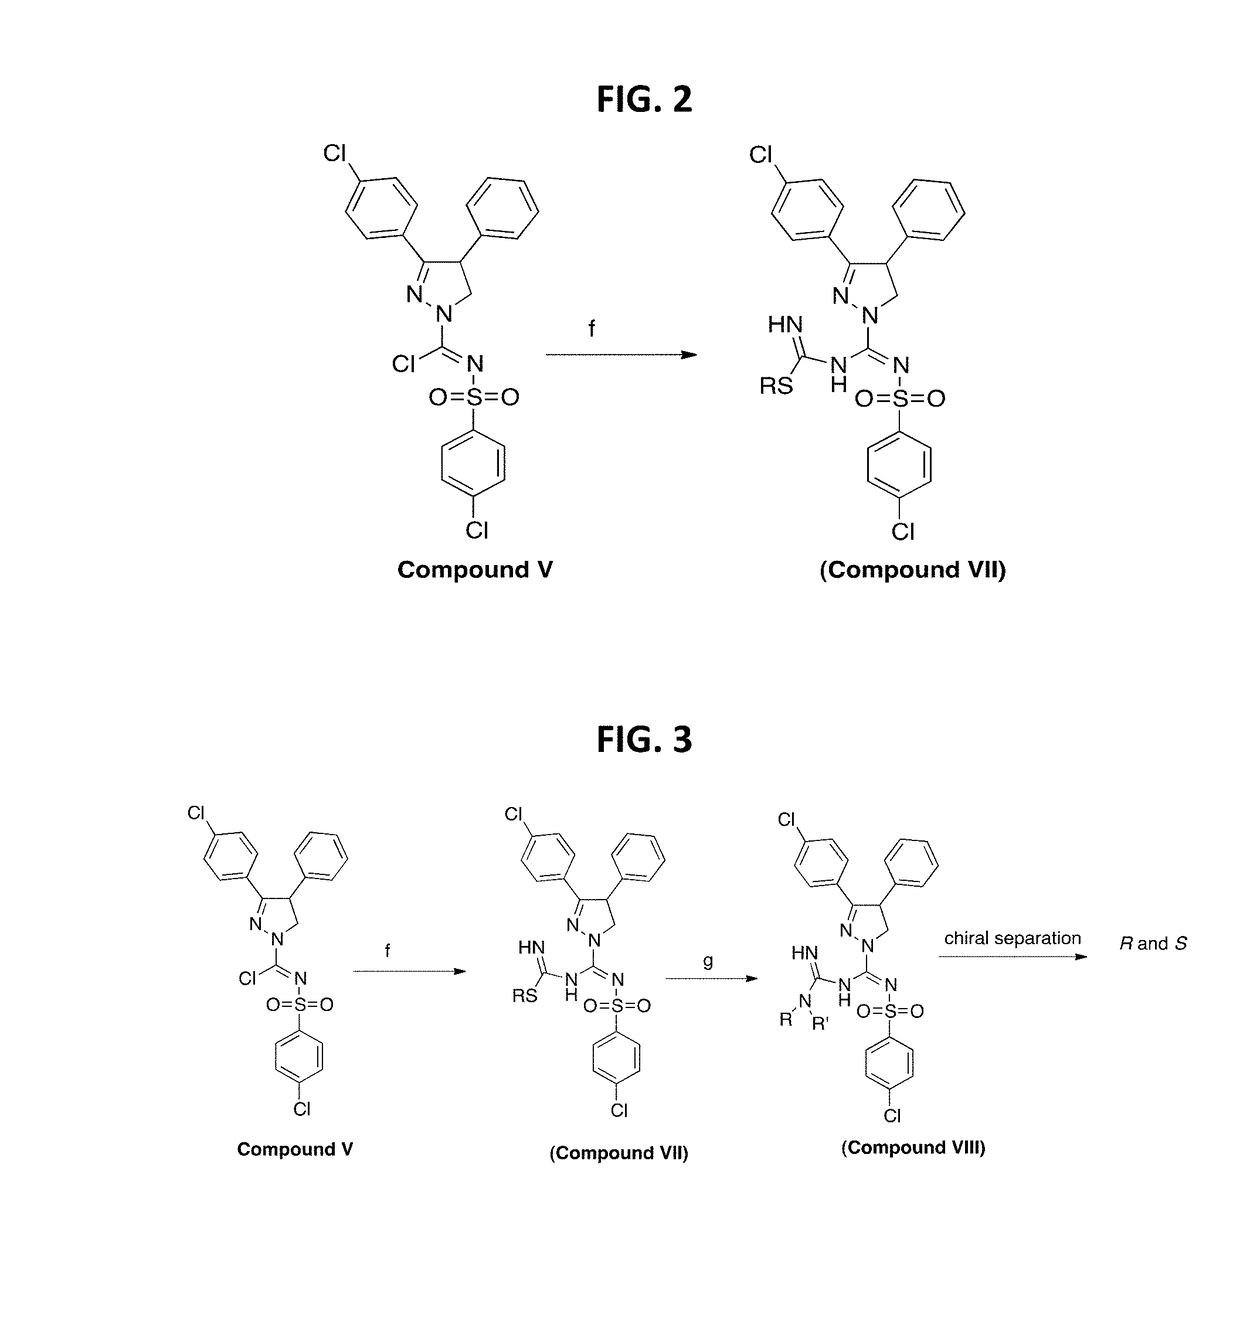 Cannabinoid receptor mediating compounds